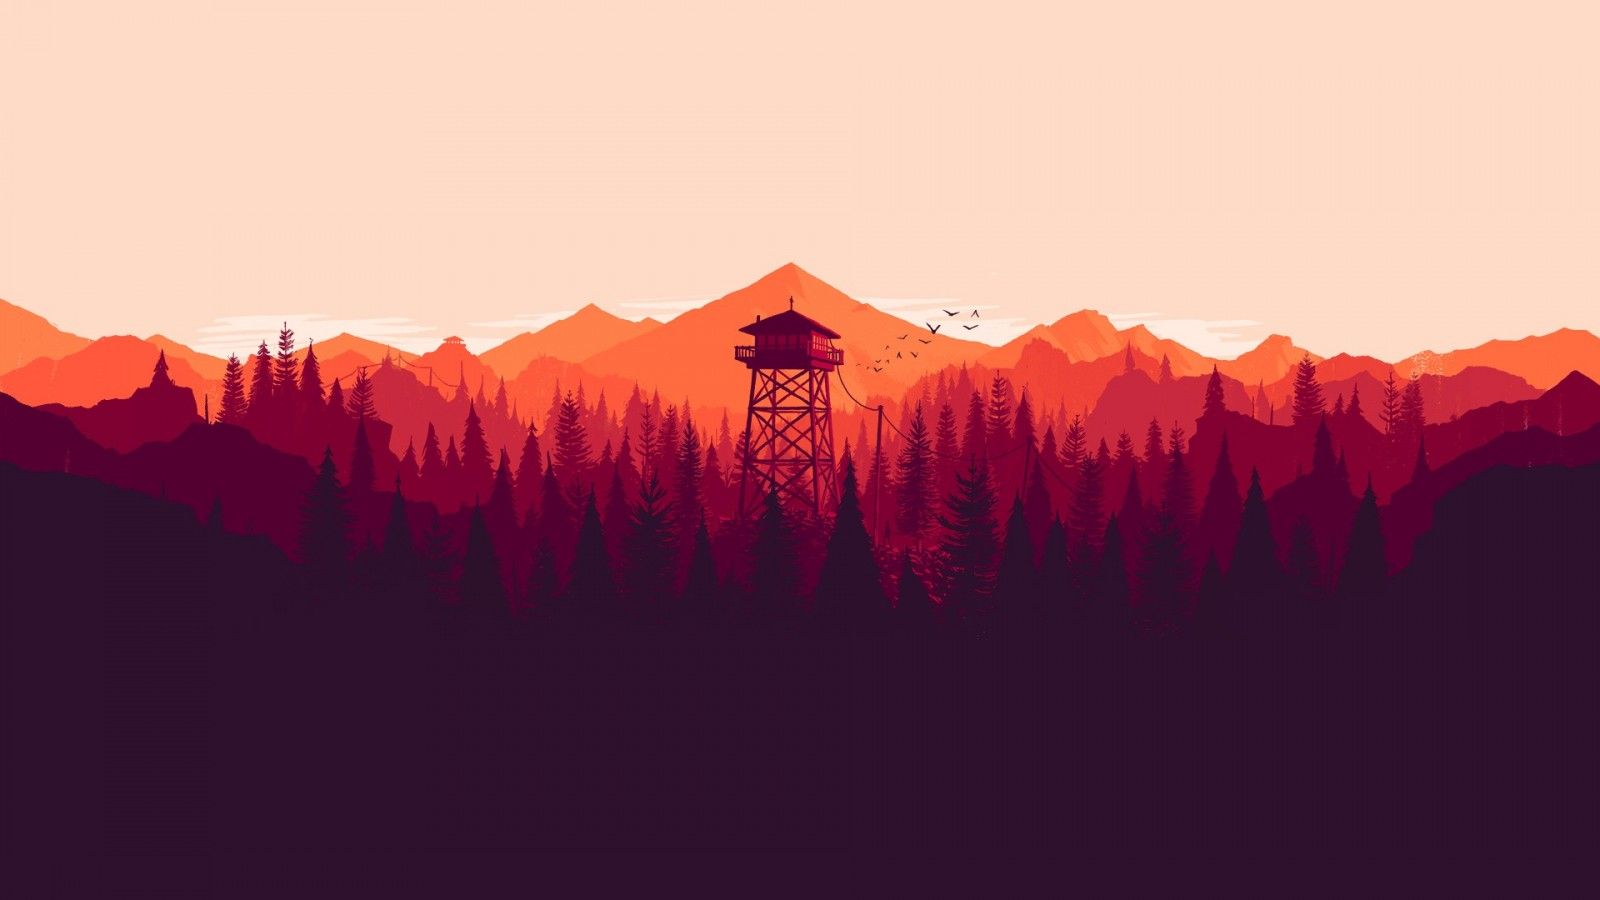 Wallpaper, landscape, colorful, forest, illustration, mountains, digital art, video games, sunset, nature, minimalism, artwork, low poly, sunrise, tower, Firewatch, Olly Moss, dawn, mountainous landforms, geographical feature, geological phenomenon